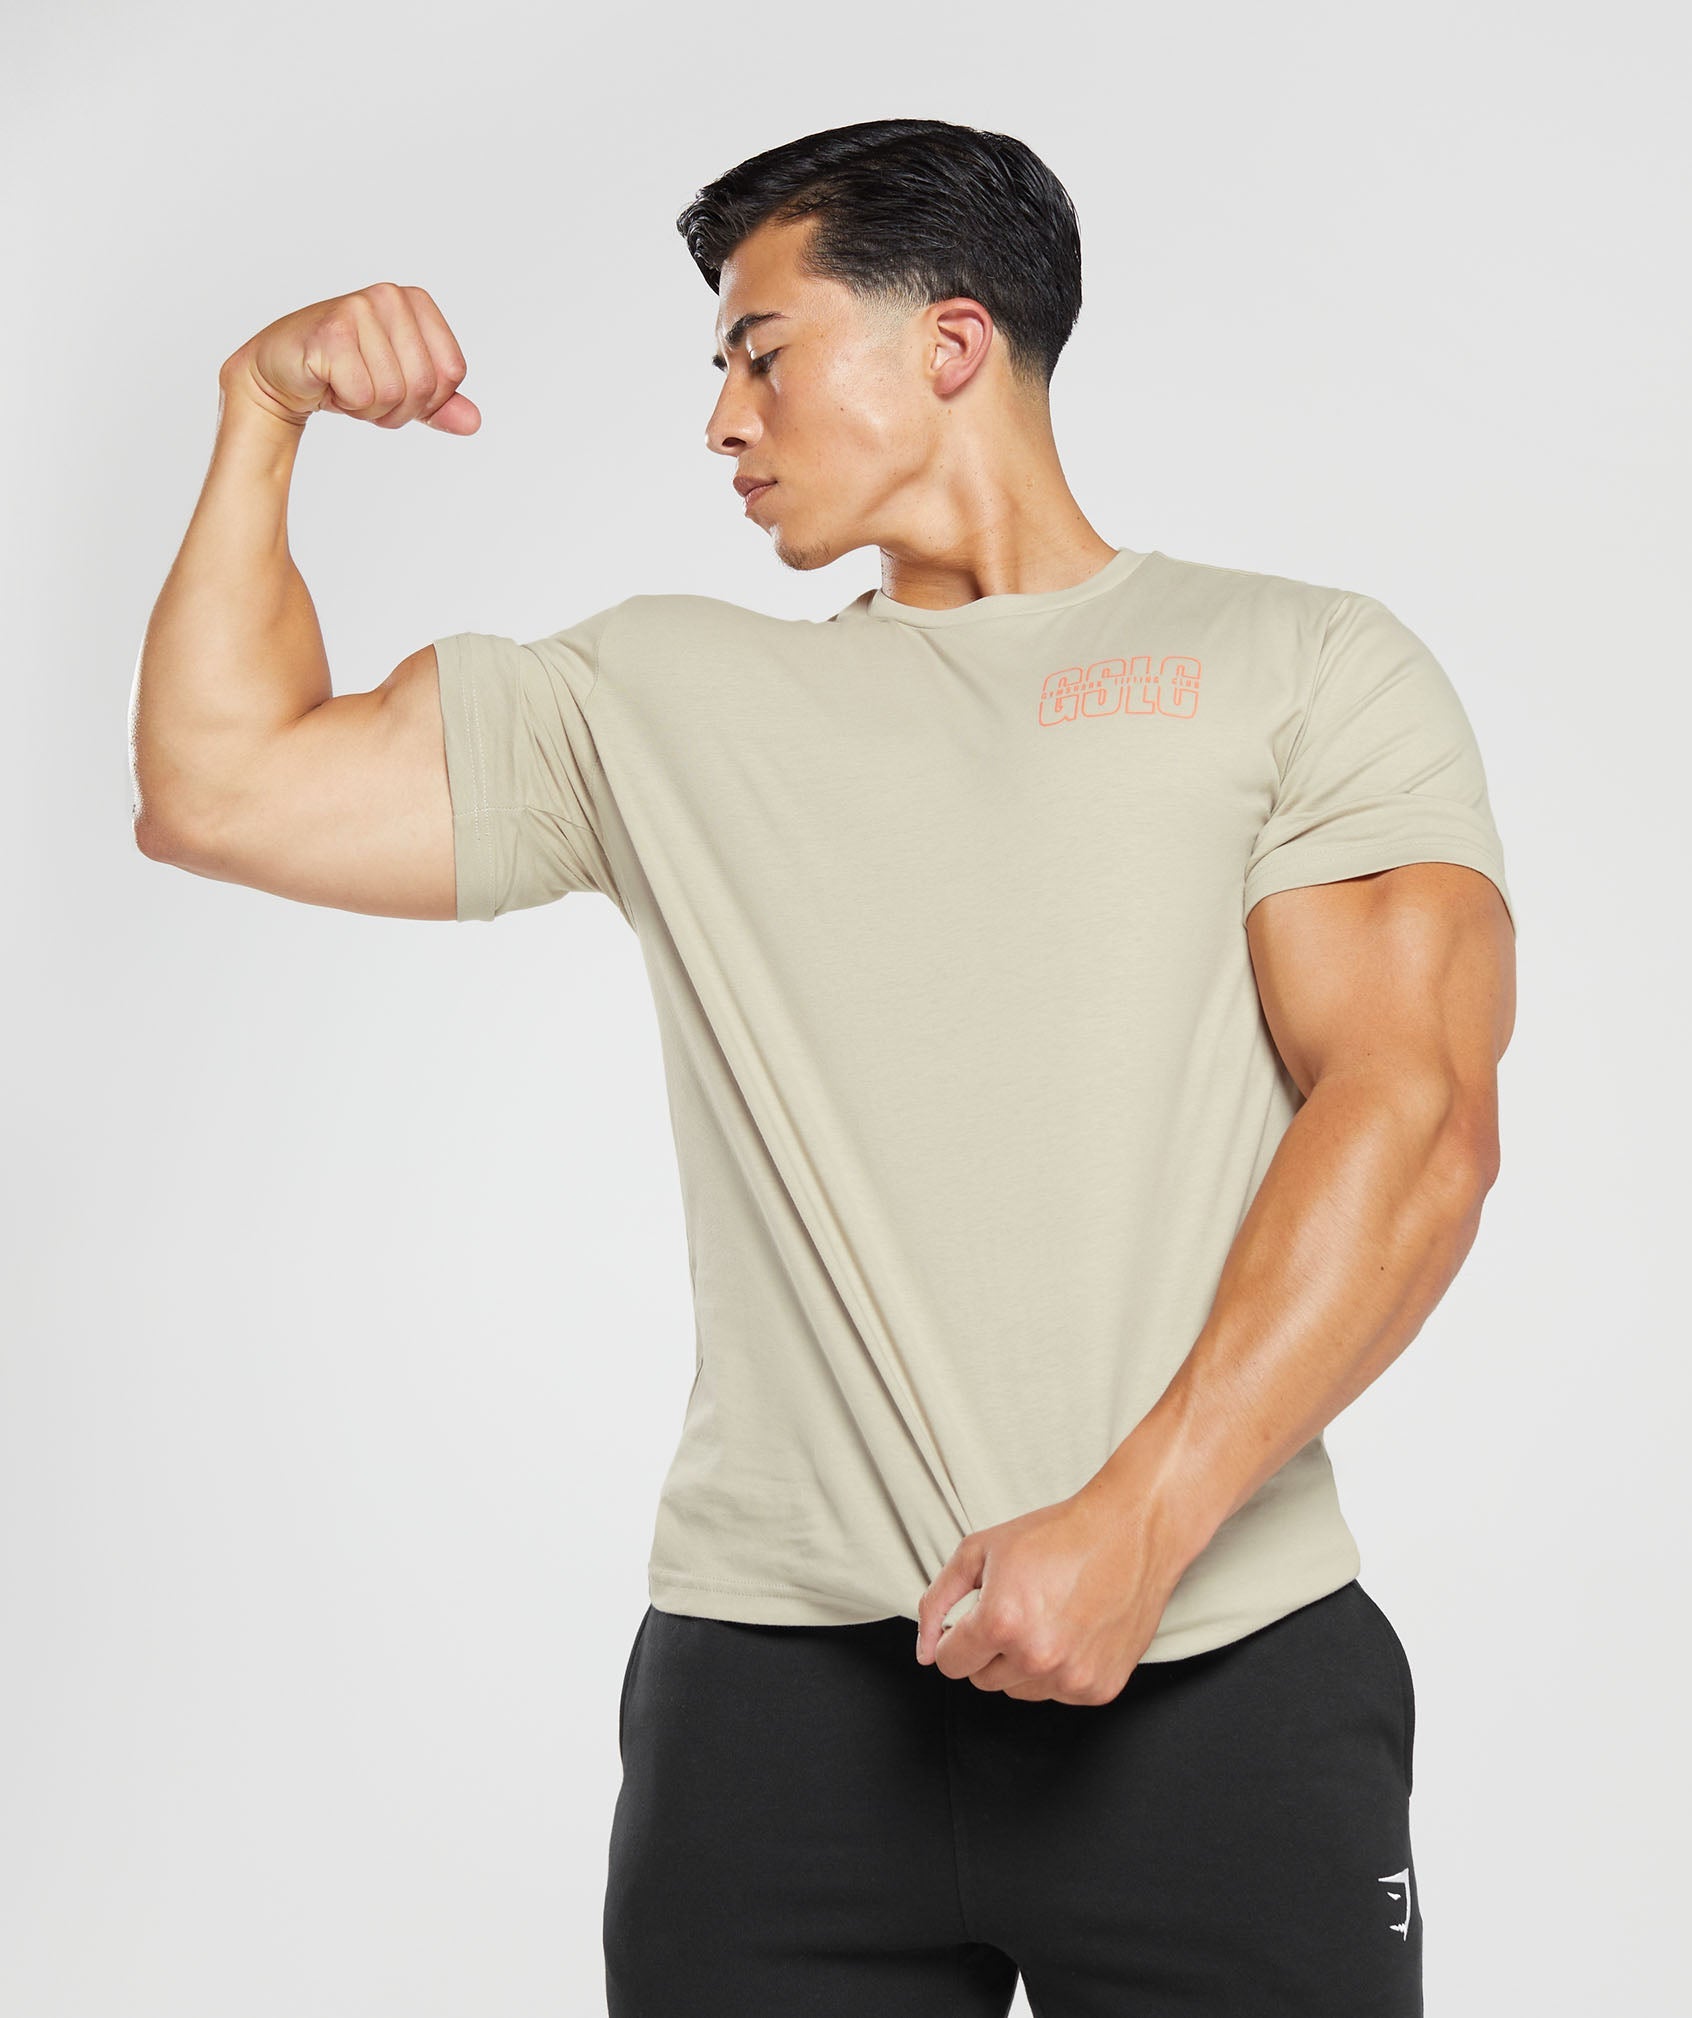 Lifting Club T-Shirt in Washed Stone Brown - view 4